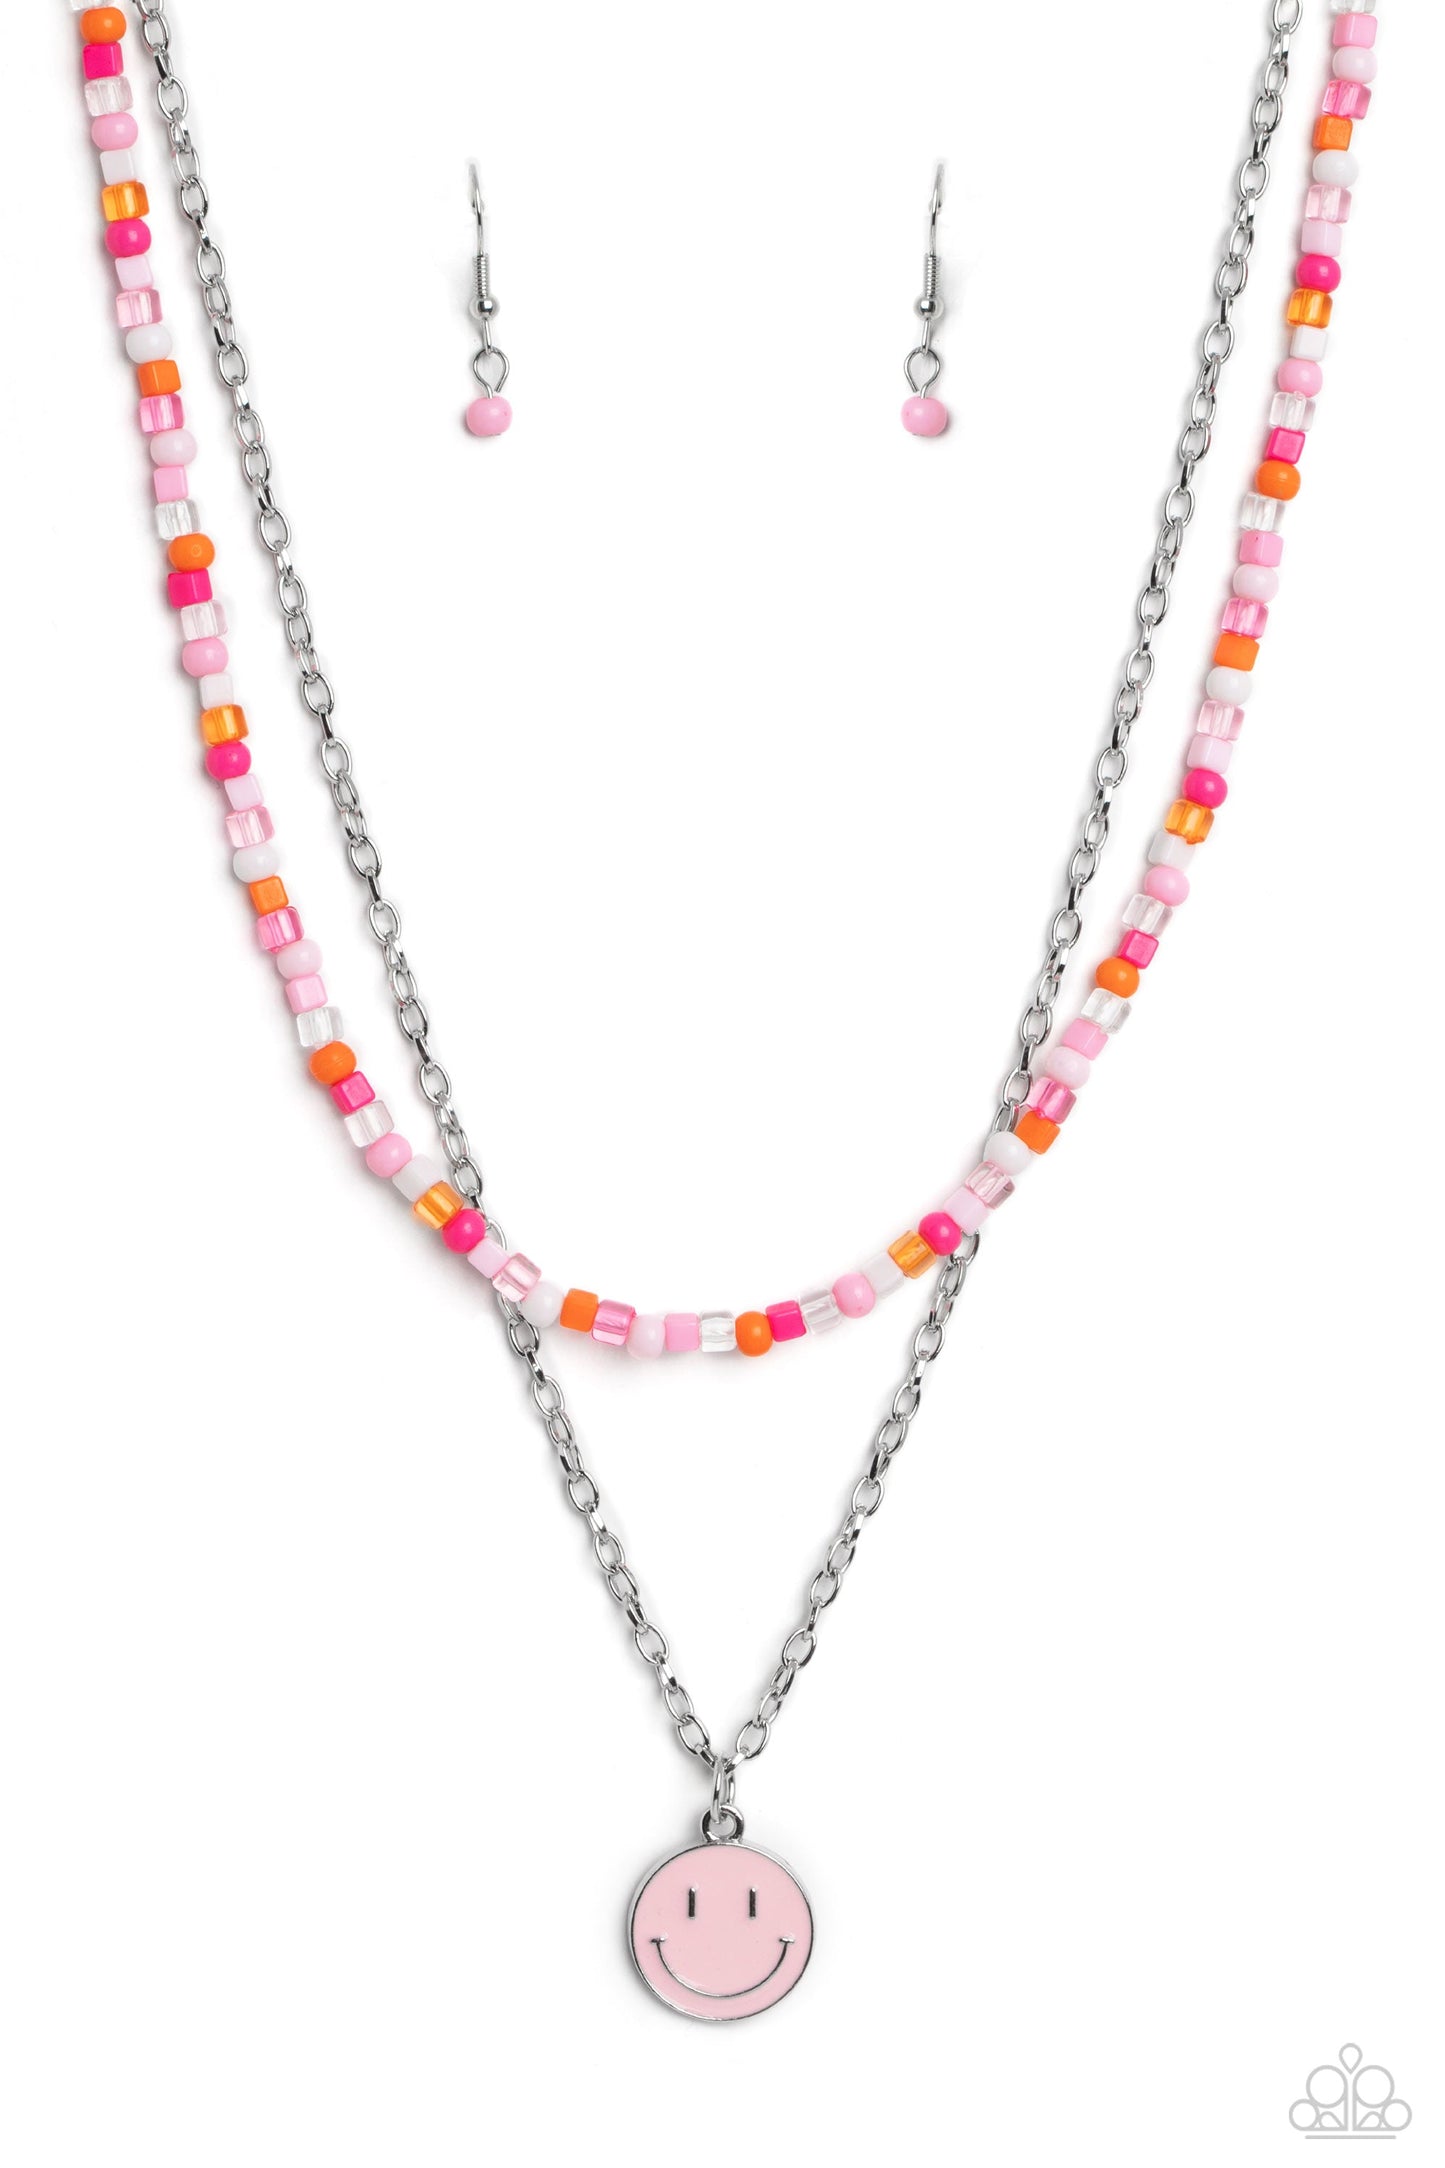 High School Reunion - Pink Seed Bead Necklace - Paparazzi Accessories - Gliding from a dainty, silver chain, a smiley face pendant stands out against a pink backdrop. Completing the charismatic ensemble, a collection of seed beads in shades of light pink, white, pink, orange, and hot pink create bright pops of color around the neckline for a youthful finish.